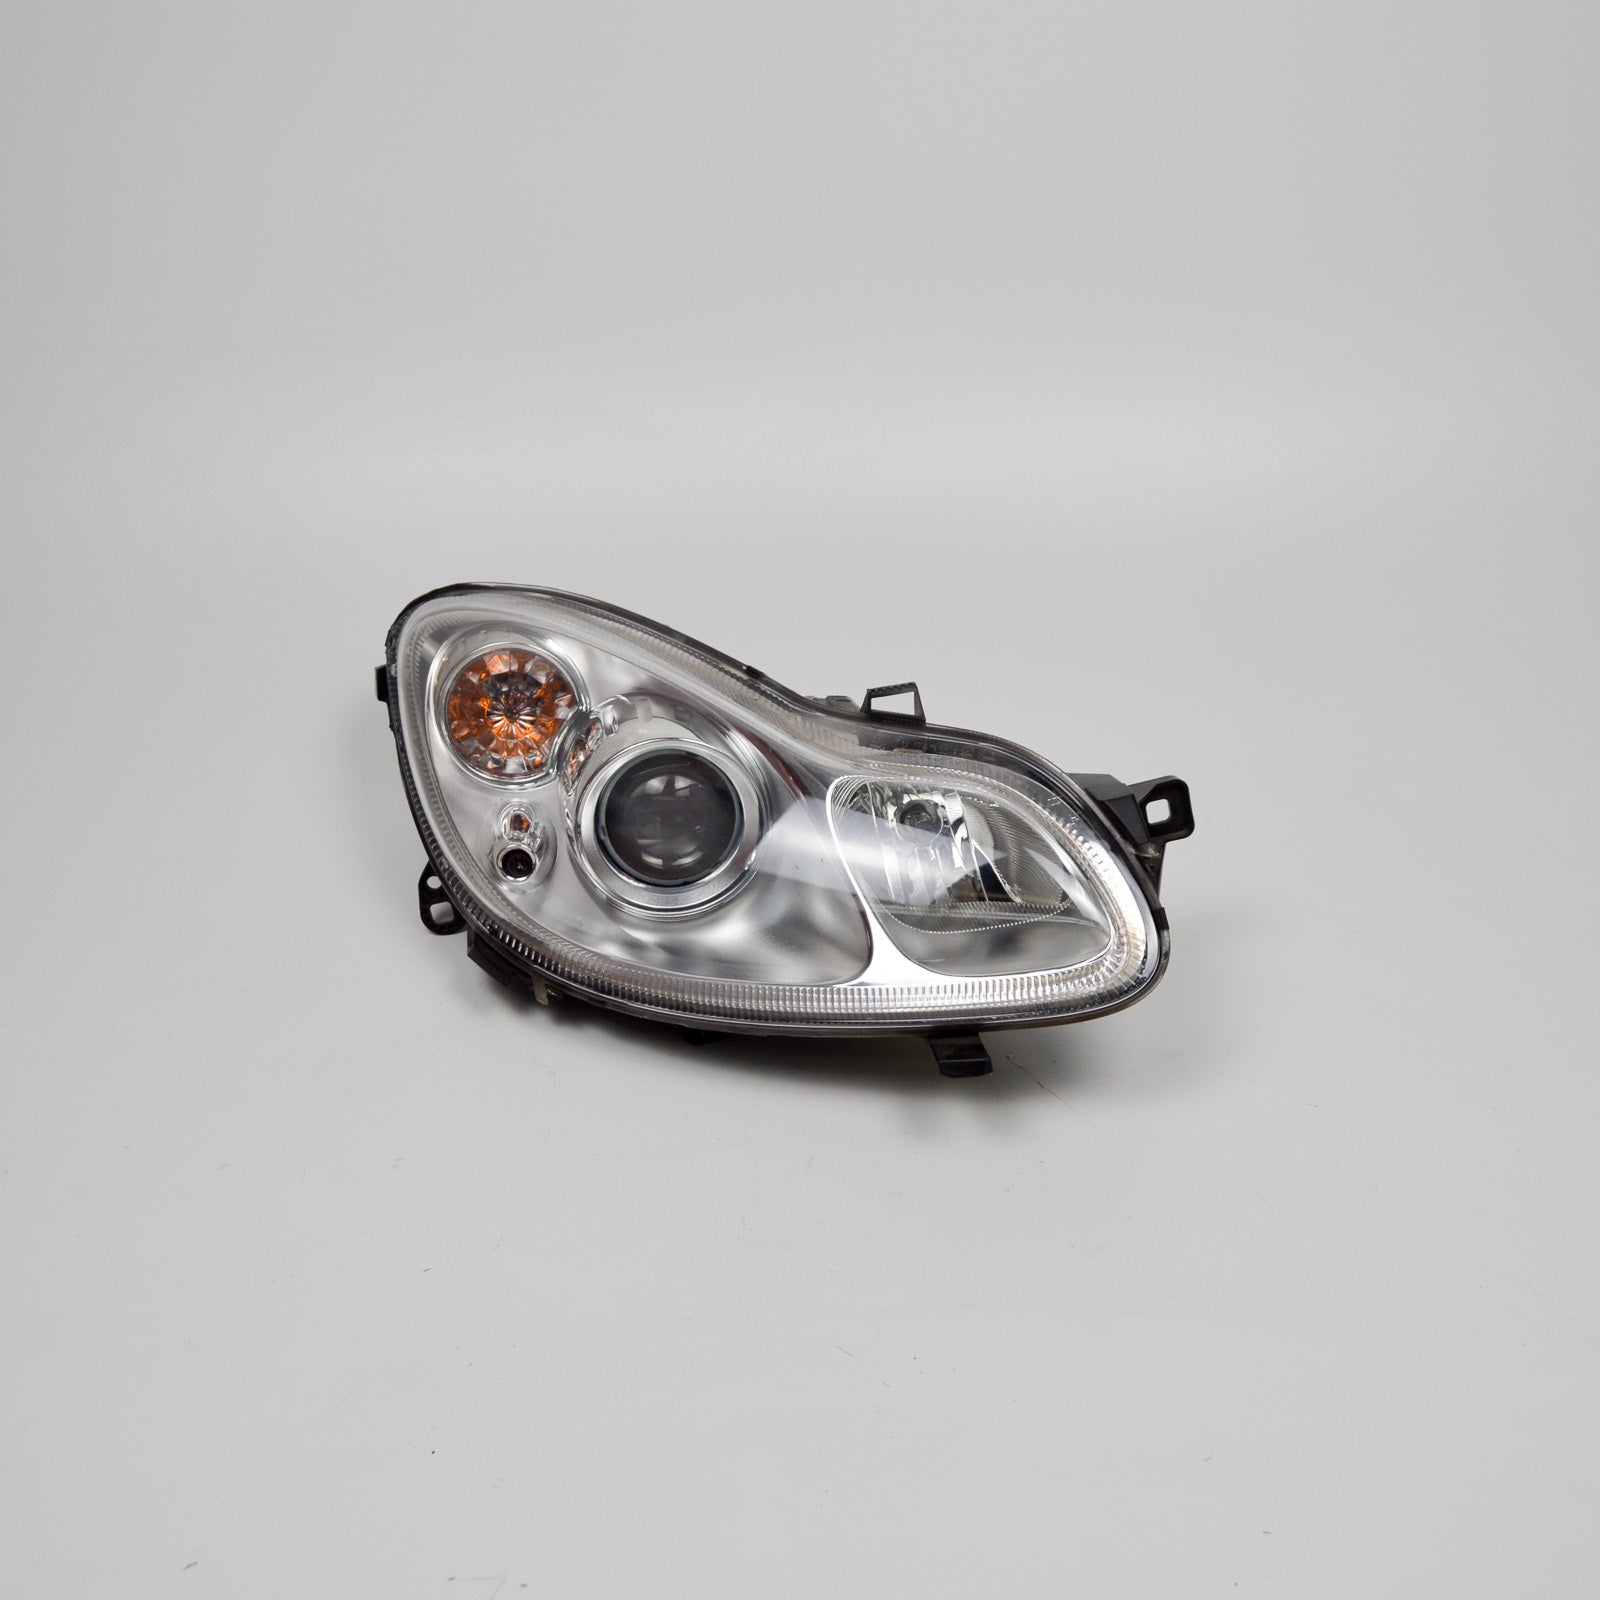 Smart Fortwo 451 headlight with servomotor on the right